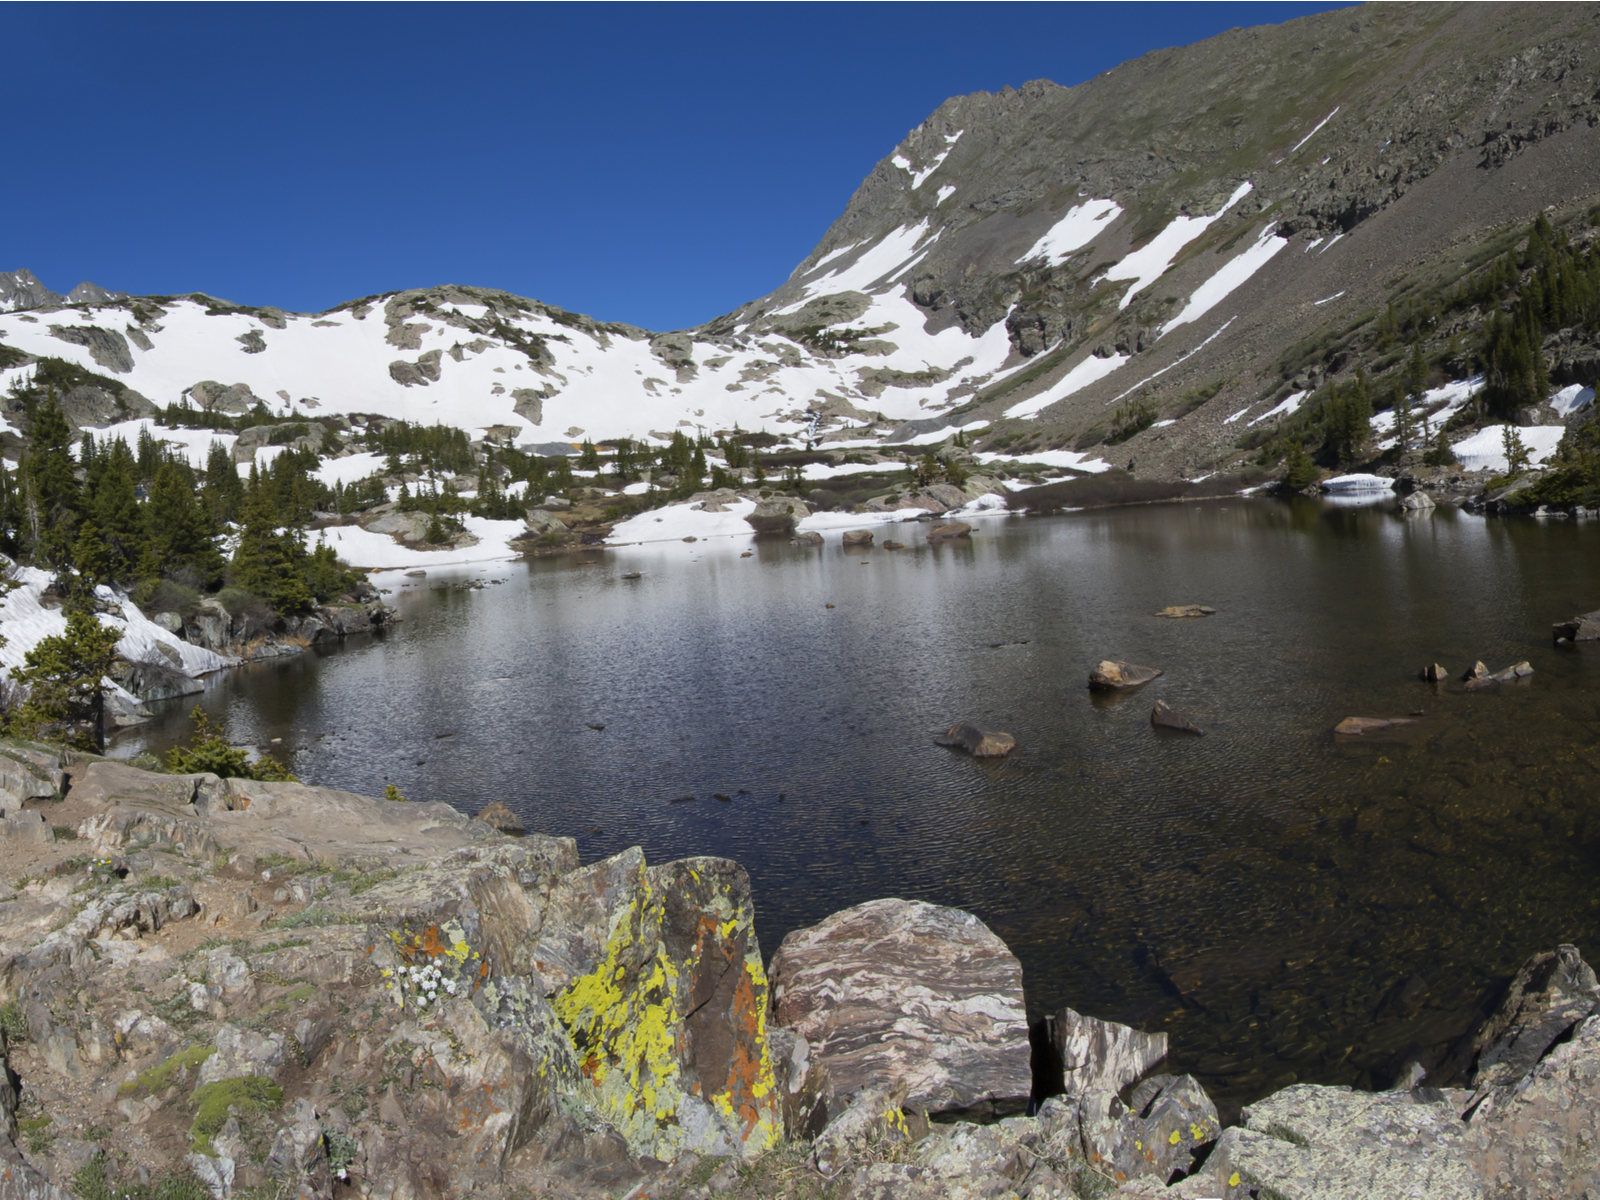 The cold waters of Mohawk Lake, surrounded by icy slopes, is a popular hiking trail and one of the best hikes near Denver